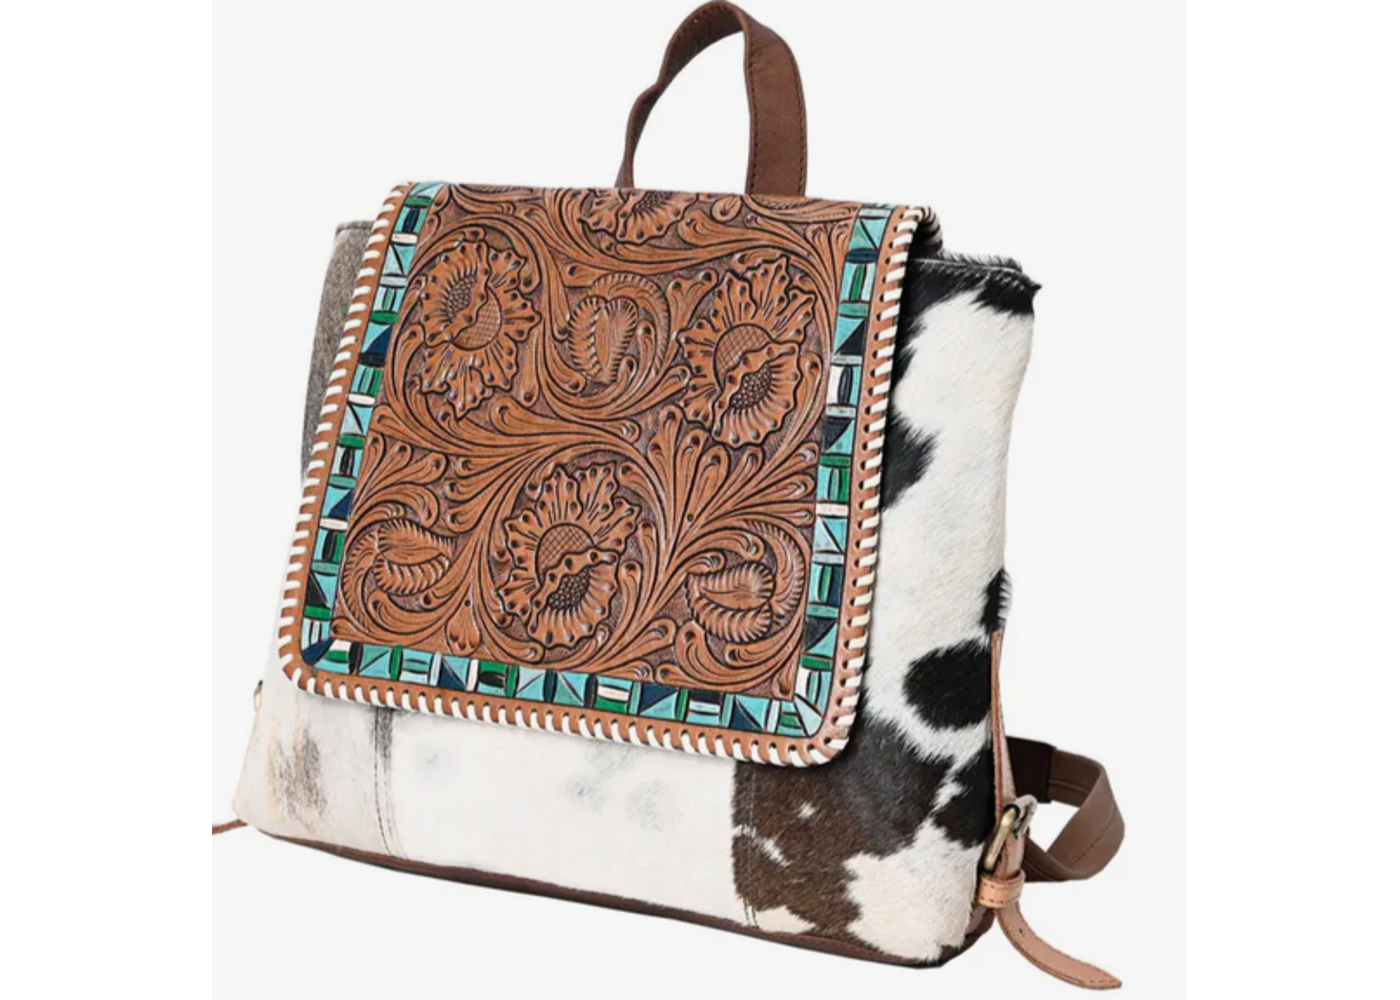 Cowhide & Lace Boutique - Adorable Cowhide backpack purses🐮💕 $95.00 3  left, grab quickly! Email/ship or pickup *cowhide colors slightly vary*